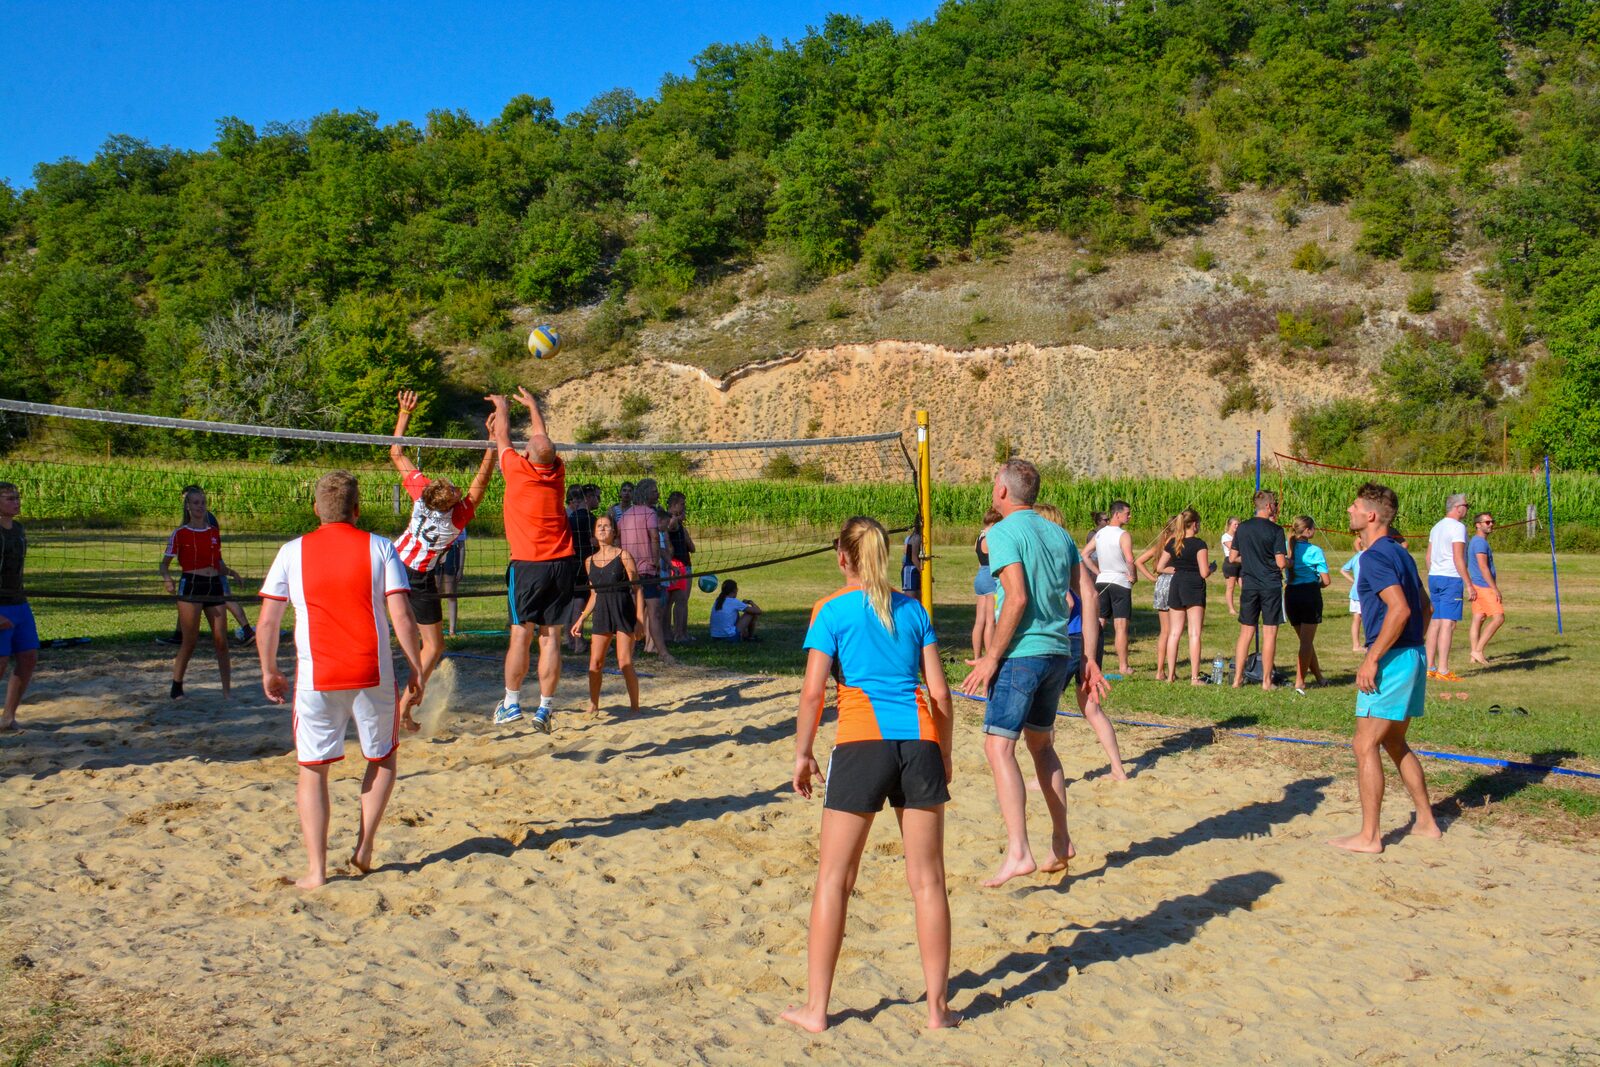 Volleyball tournament at La Draille Beter Uit holiday park